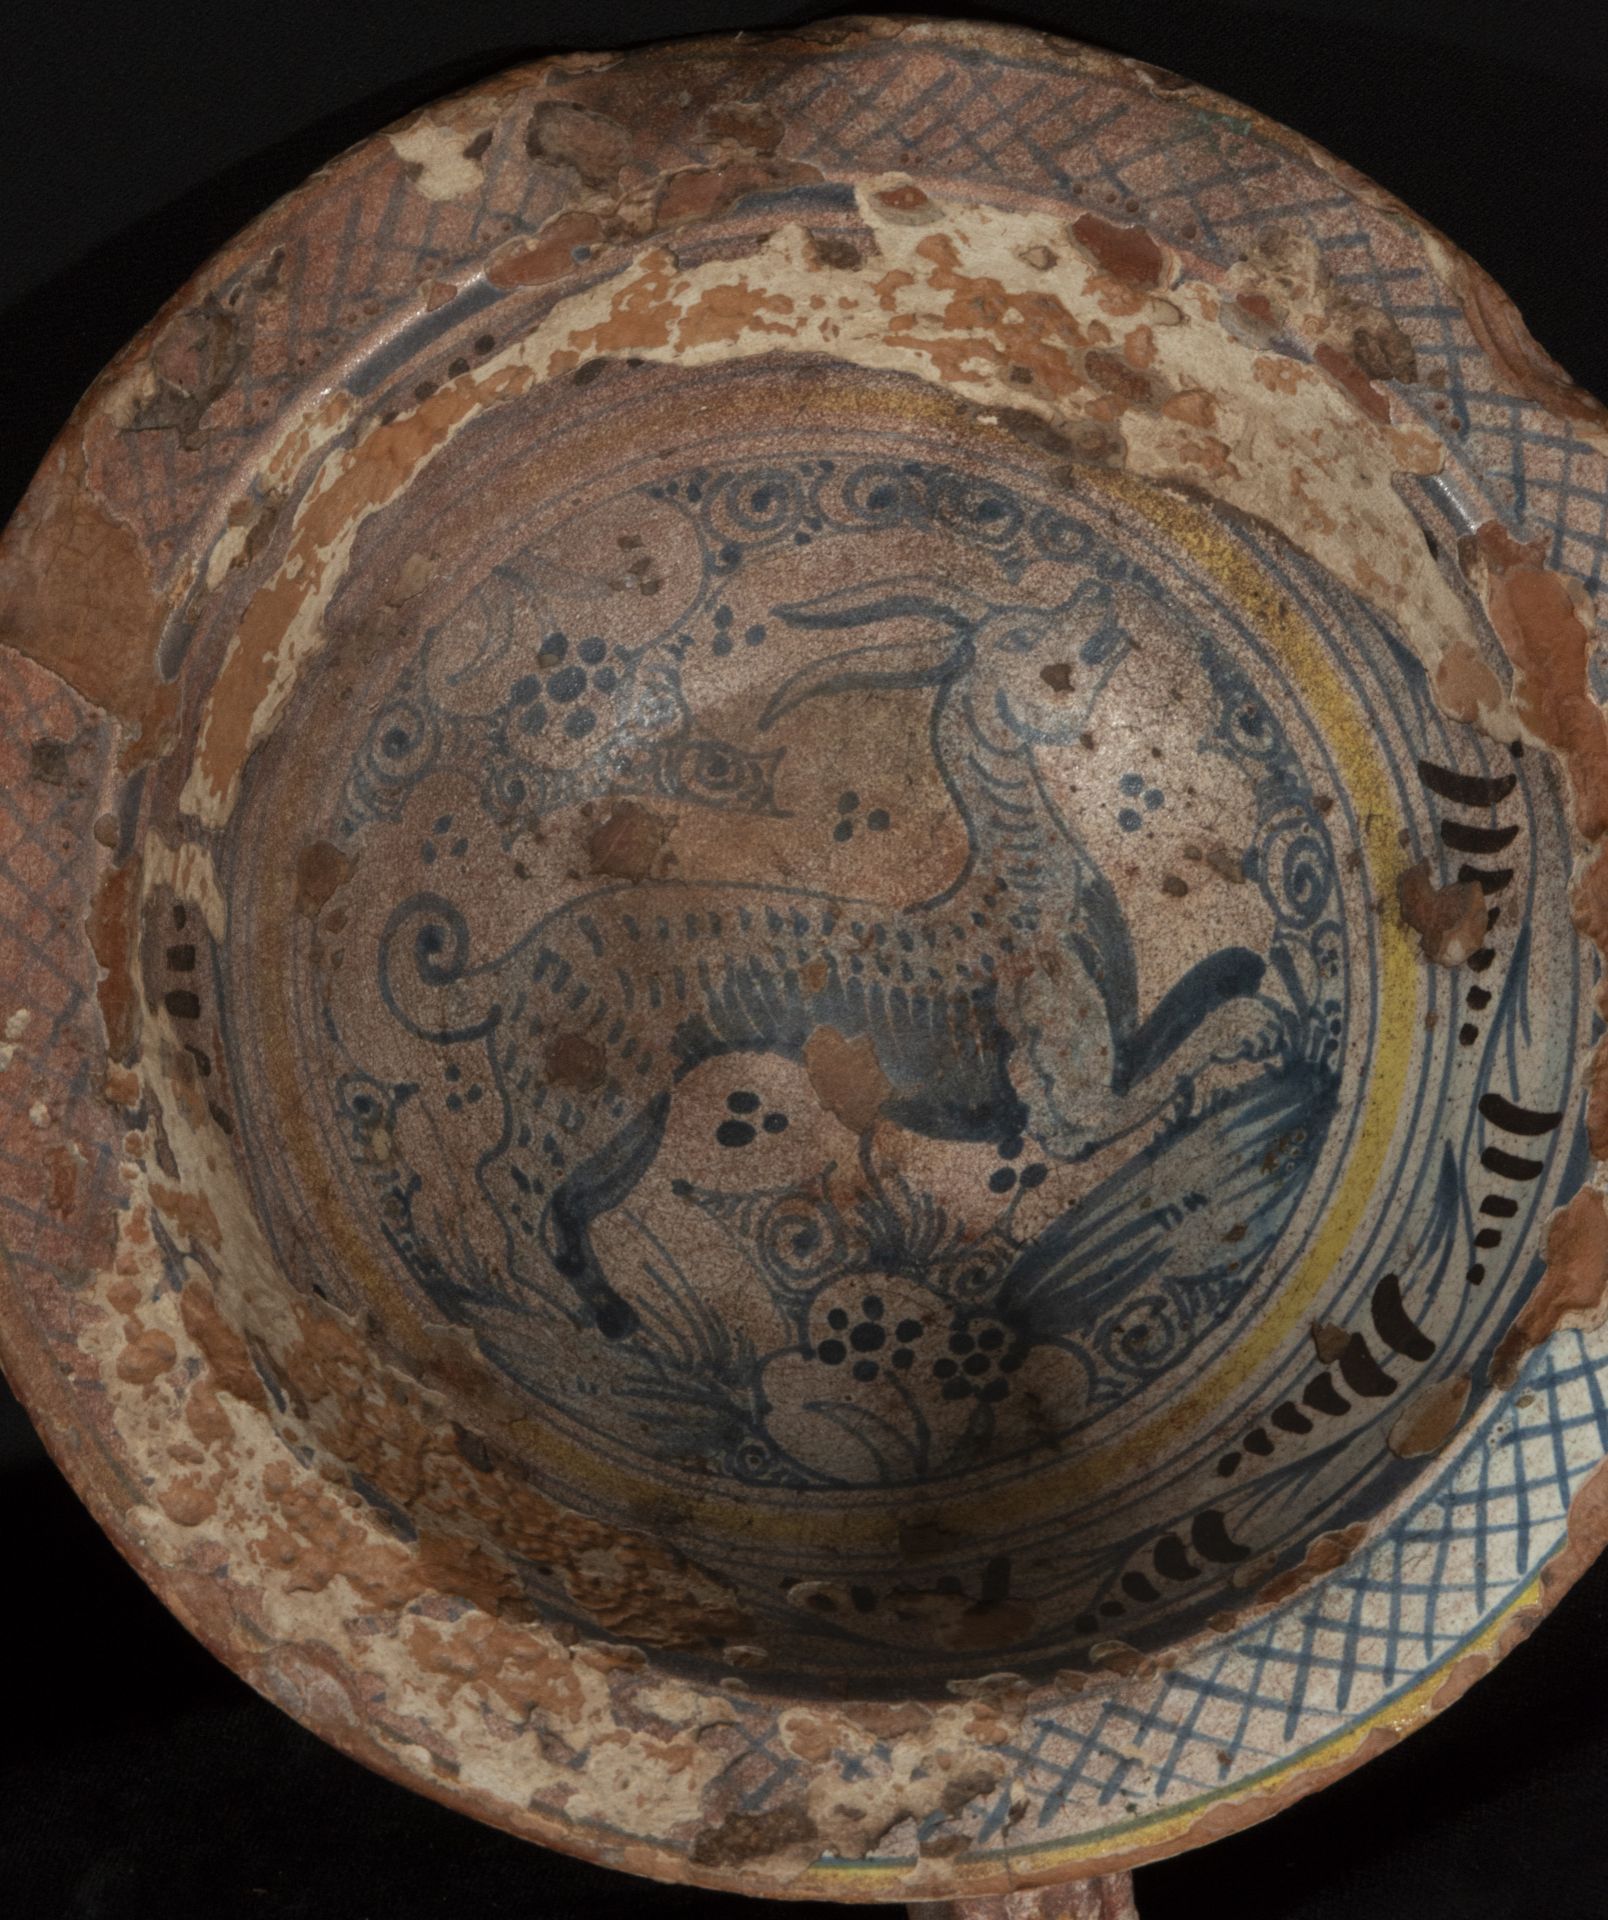 Rare and Exceptional large fruitbowl in Mexican Talavera Ceramics from Tolaná, 17th century Mexican  - Image 2 of 2